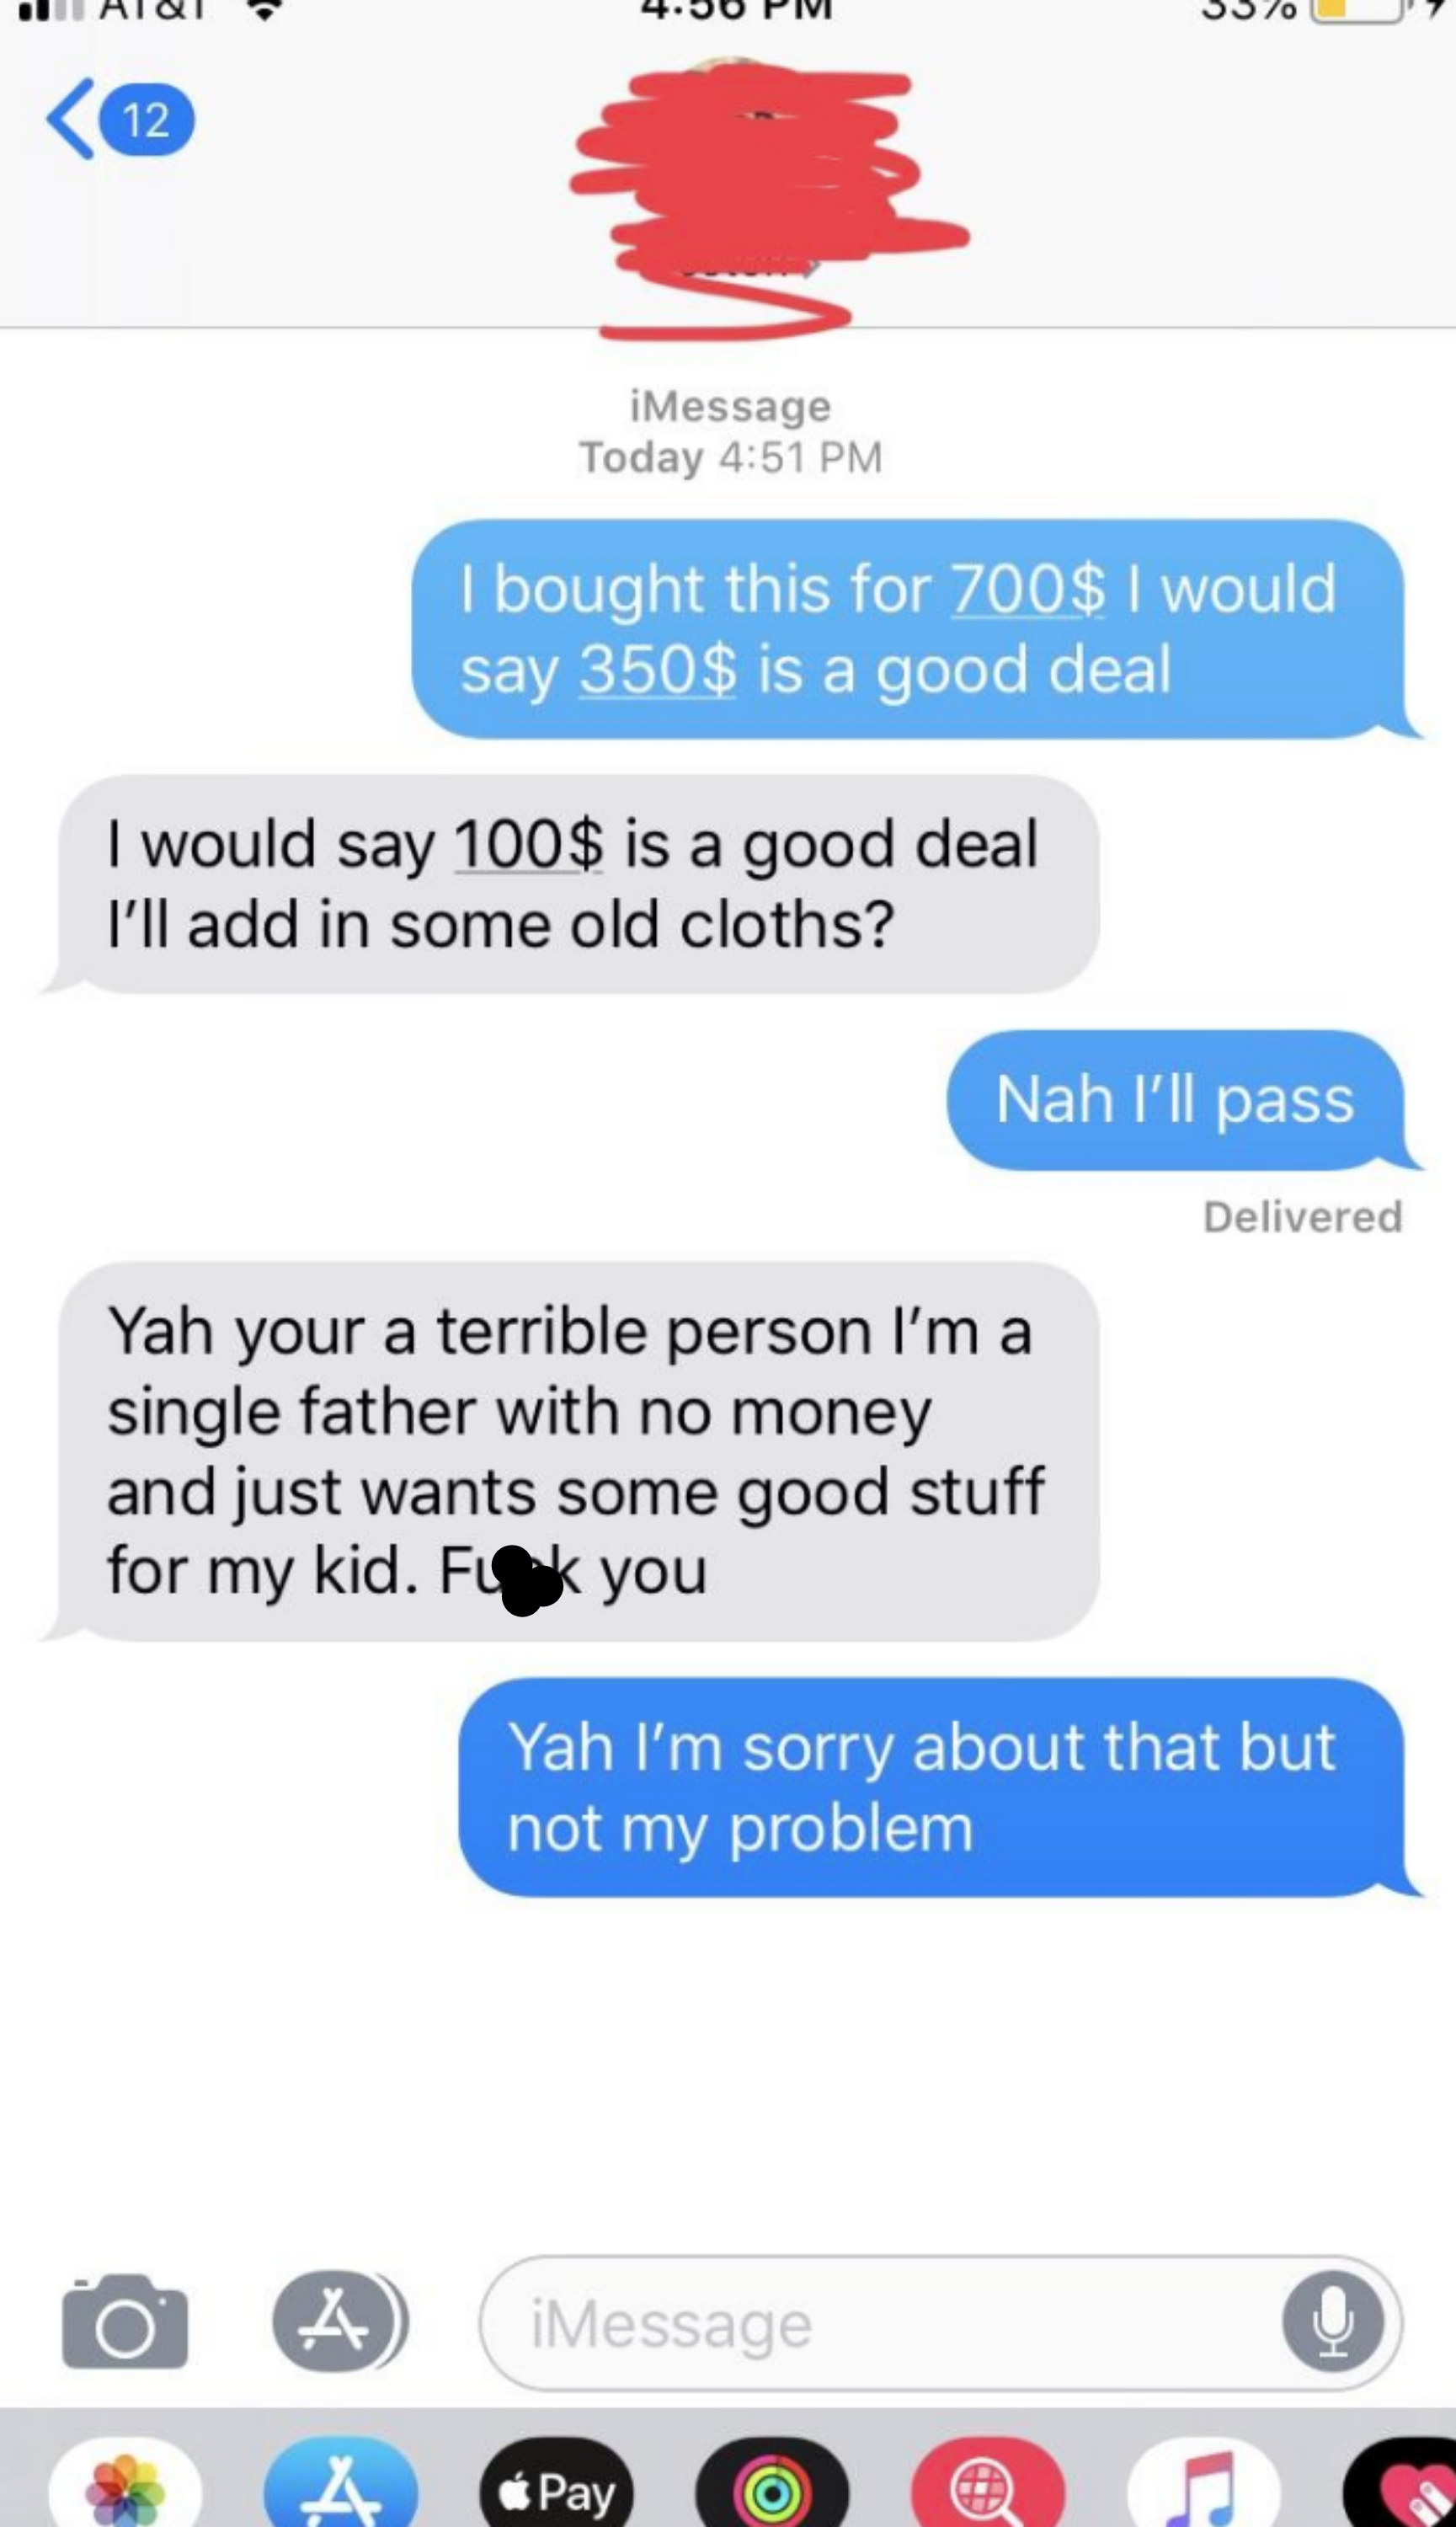 Single dad offers $100 and &quot;some old clothes&quot; for what person paid $700 for and is selling for $350; person says they&#x27;ll pass, and dad says they&#x27;re a terrible person and fuck you